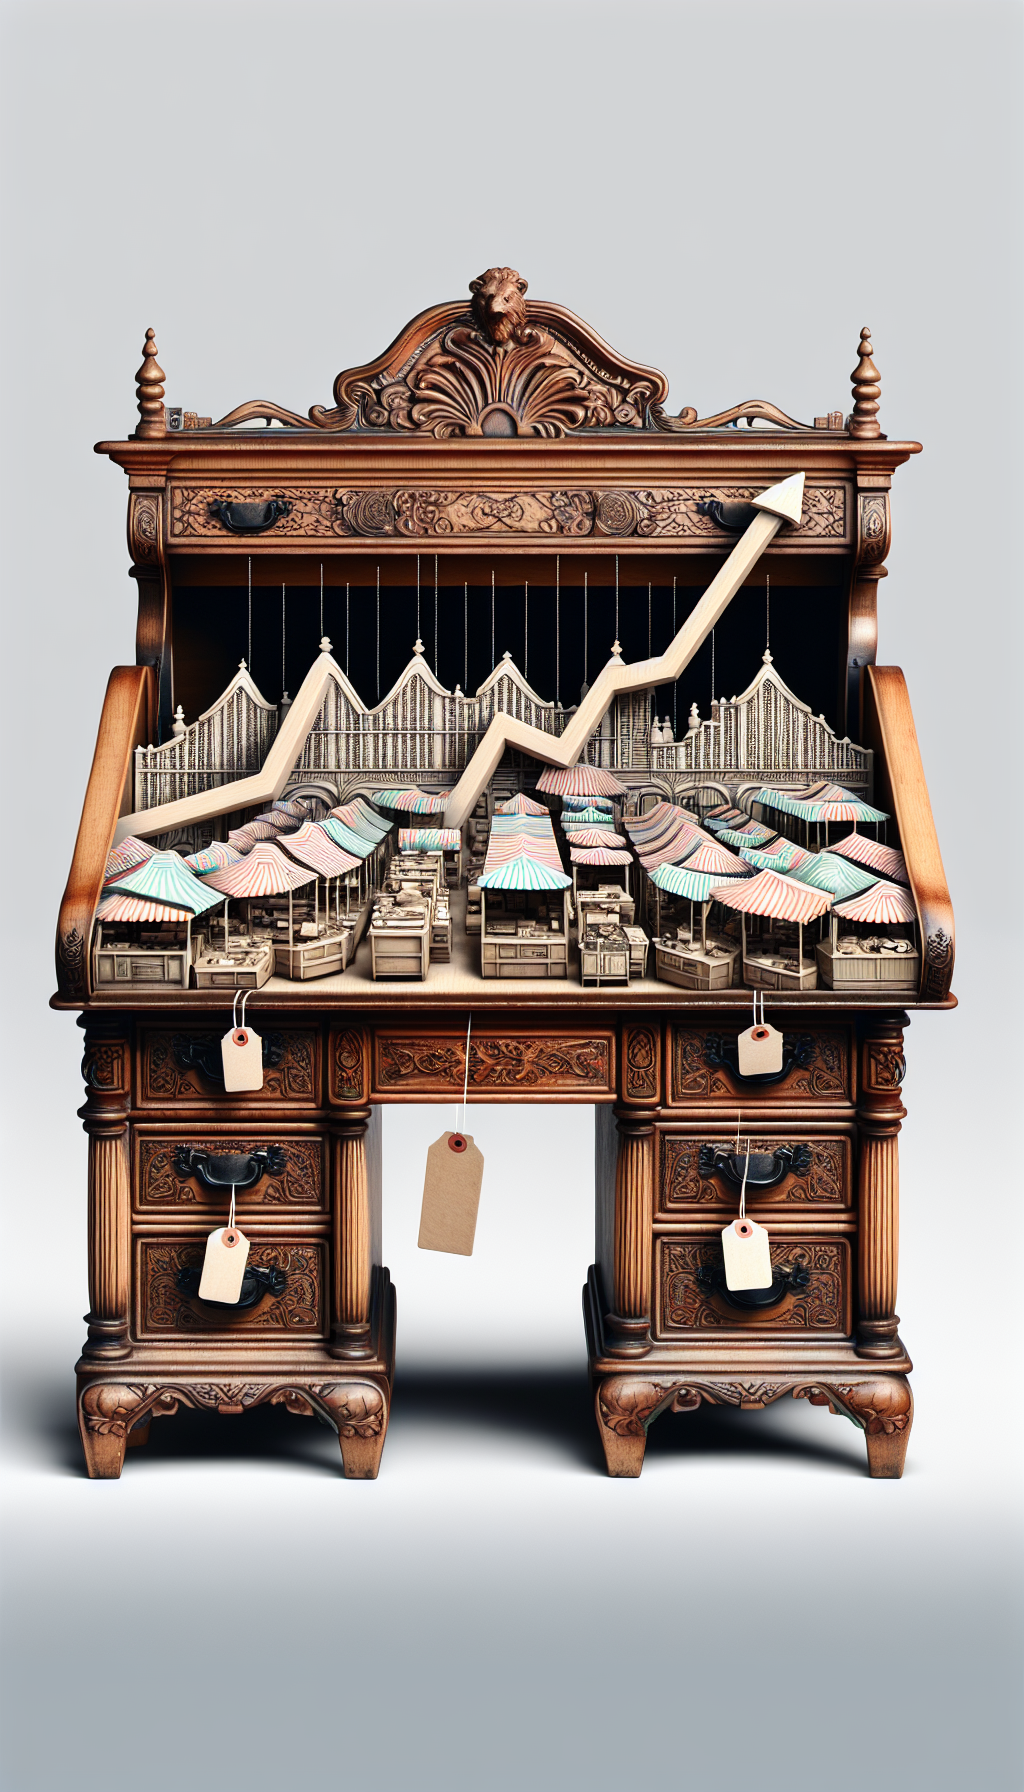 An illustration showcases a grand, ornately carved antique secretary desk whose drop front opens to reveal a bustling, vintage-style marketplace. The market stalls are intricately designed to represent graph lines, indicating rising and falling trends. Price tags dangle from the desk drawers, subtly fluctuating in size to symbolize varying values, seamlessly blending the themes of antiques and market demand.